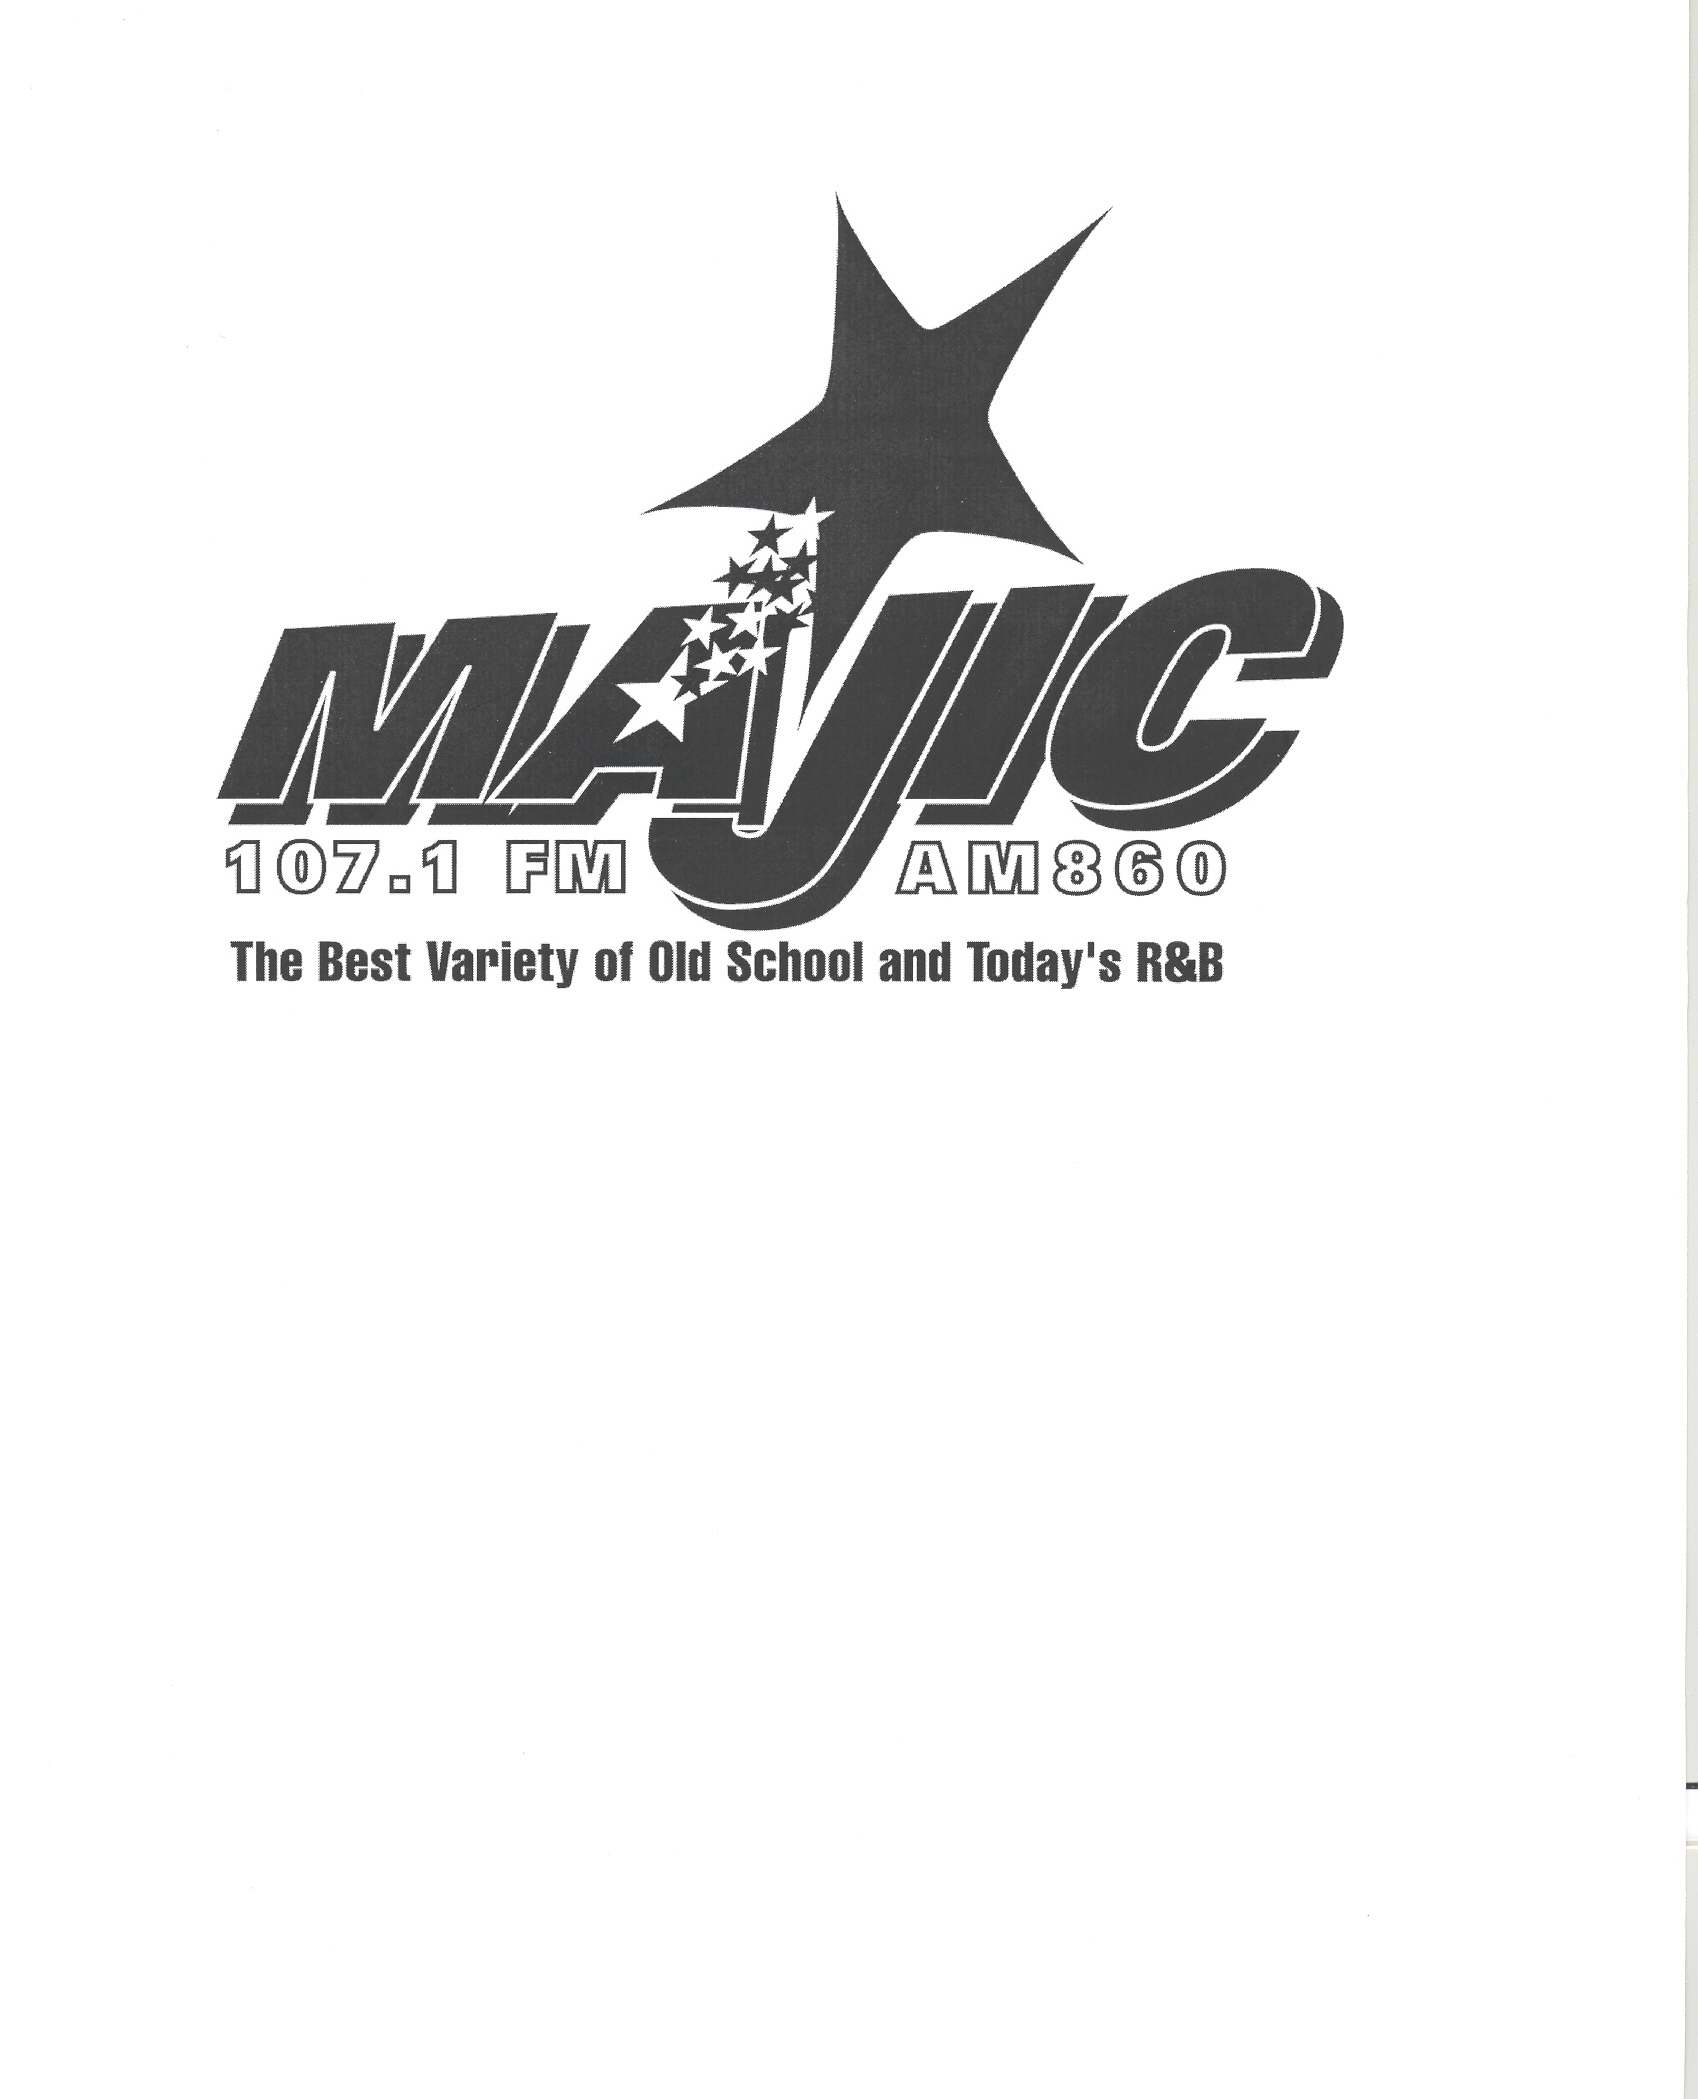  MAJIC 107.1 FM AM 860 THE BEST VARIETY OF OLD SCHOOL AND TODAY'S R&amp;B